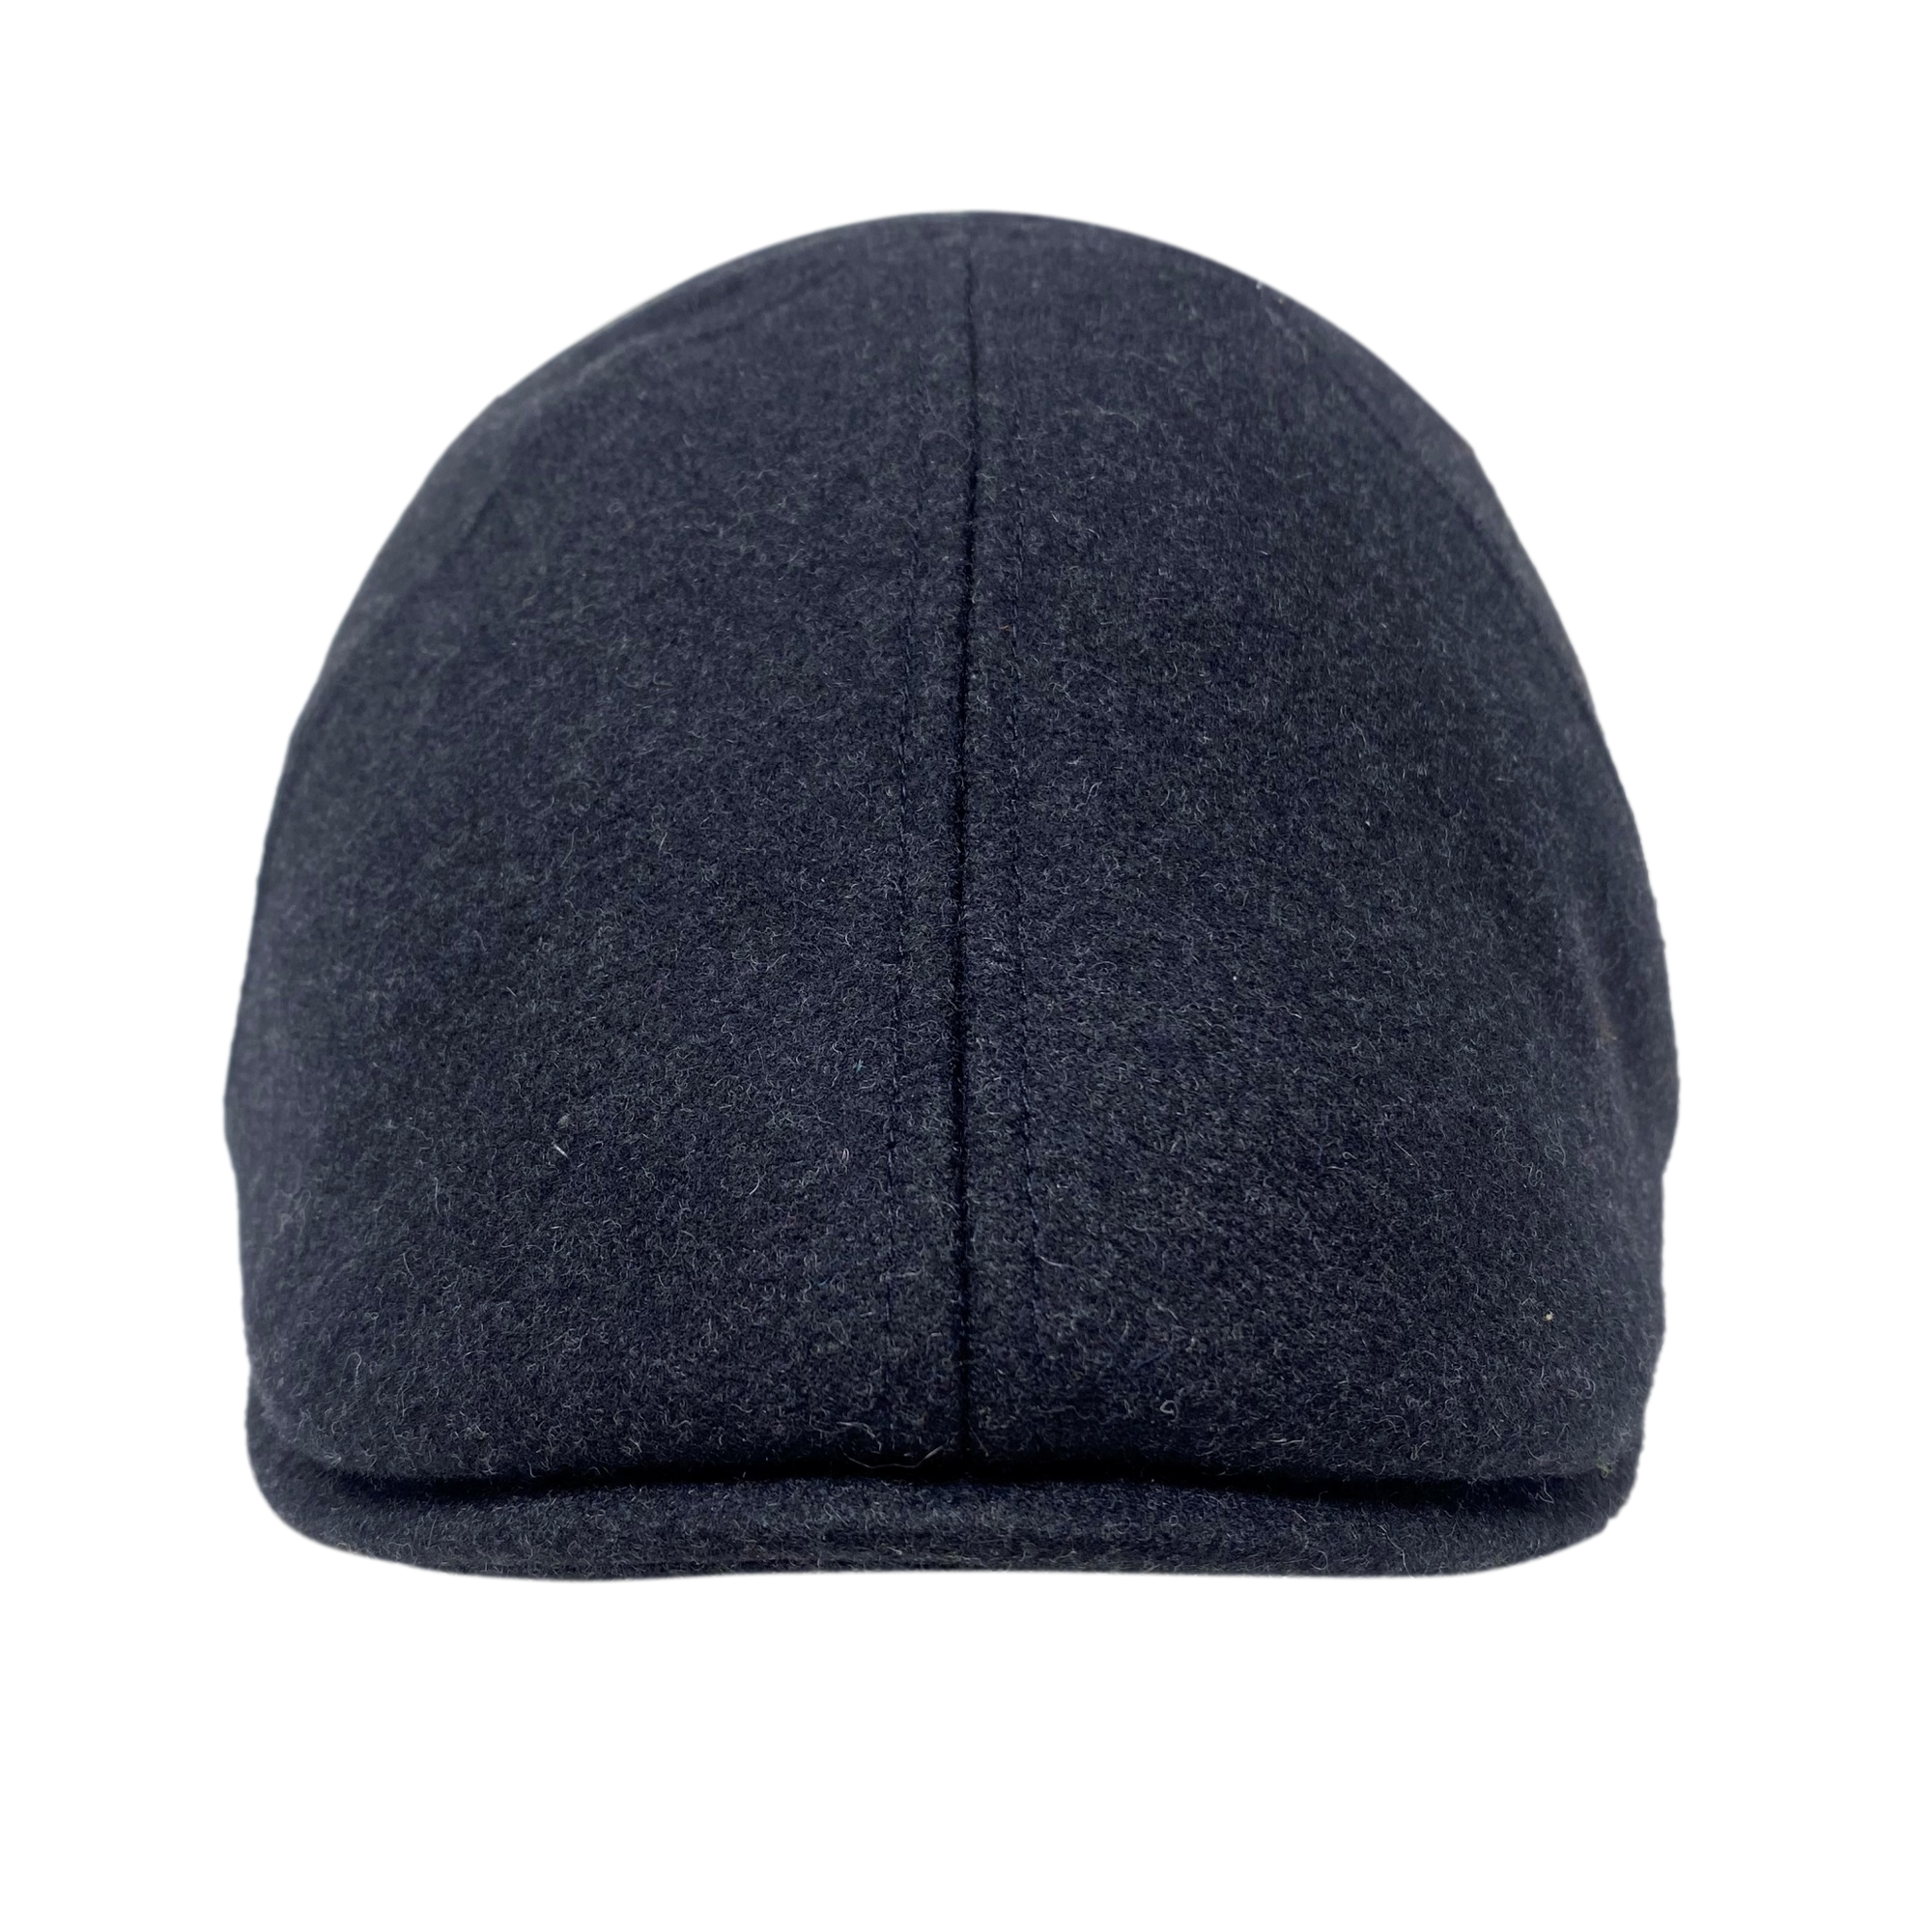 Philly Jeff Cap: Small / Charcoal